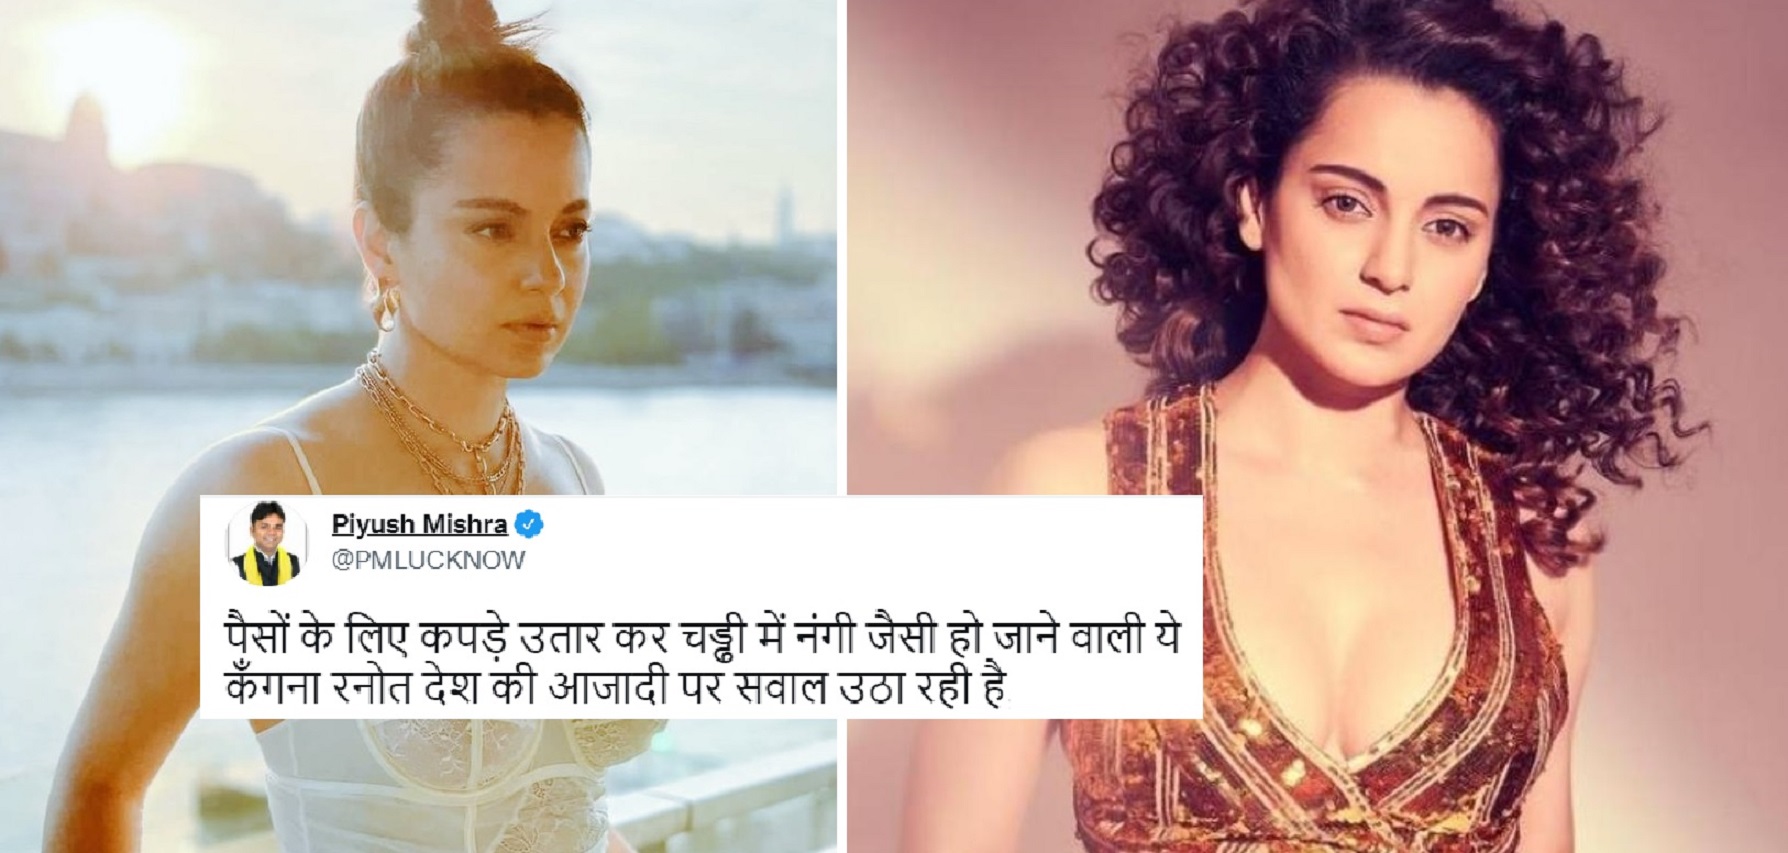 People Come In Kangana Ranaut’s Defense As She Gets Slut-Shamed After Her Comments on India’s Freedom